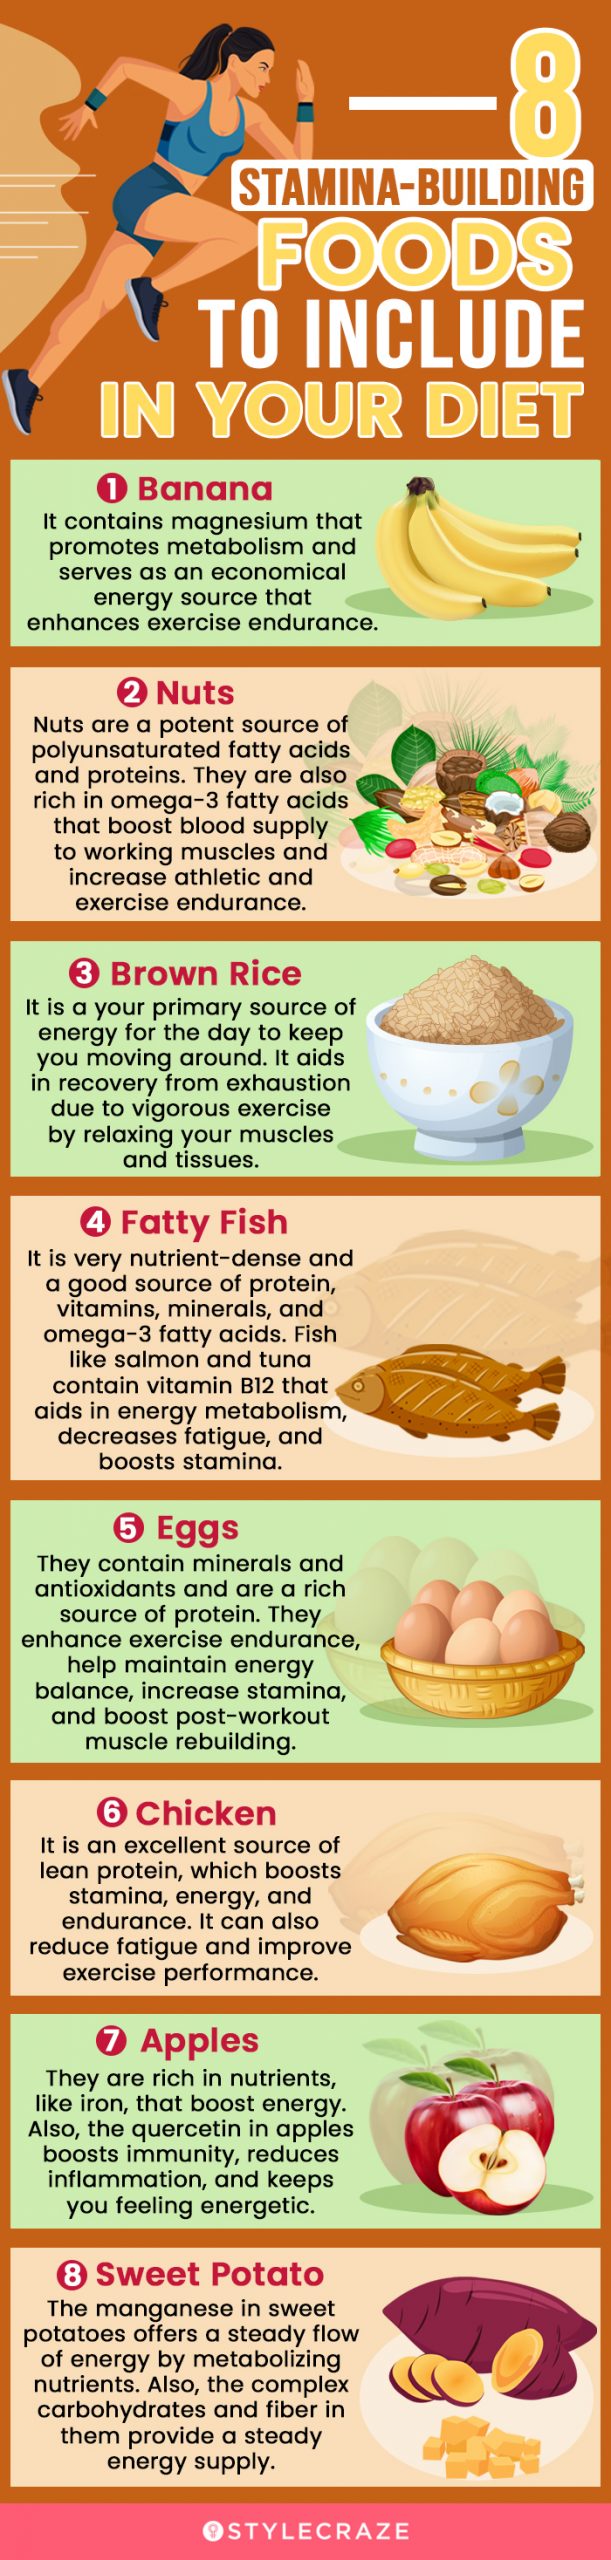 8 stamina building foods to include in your diet (infographic)